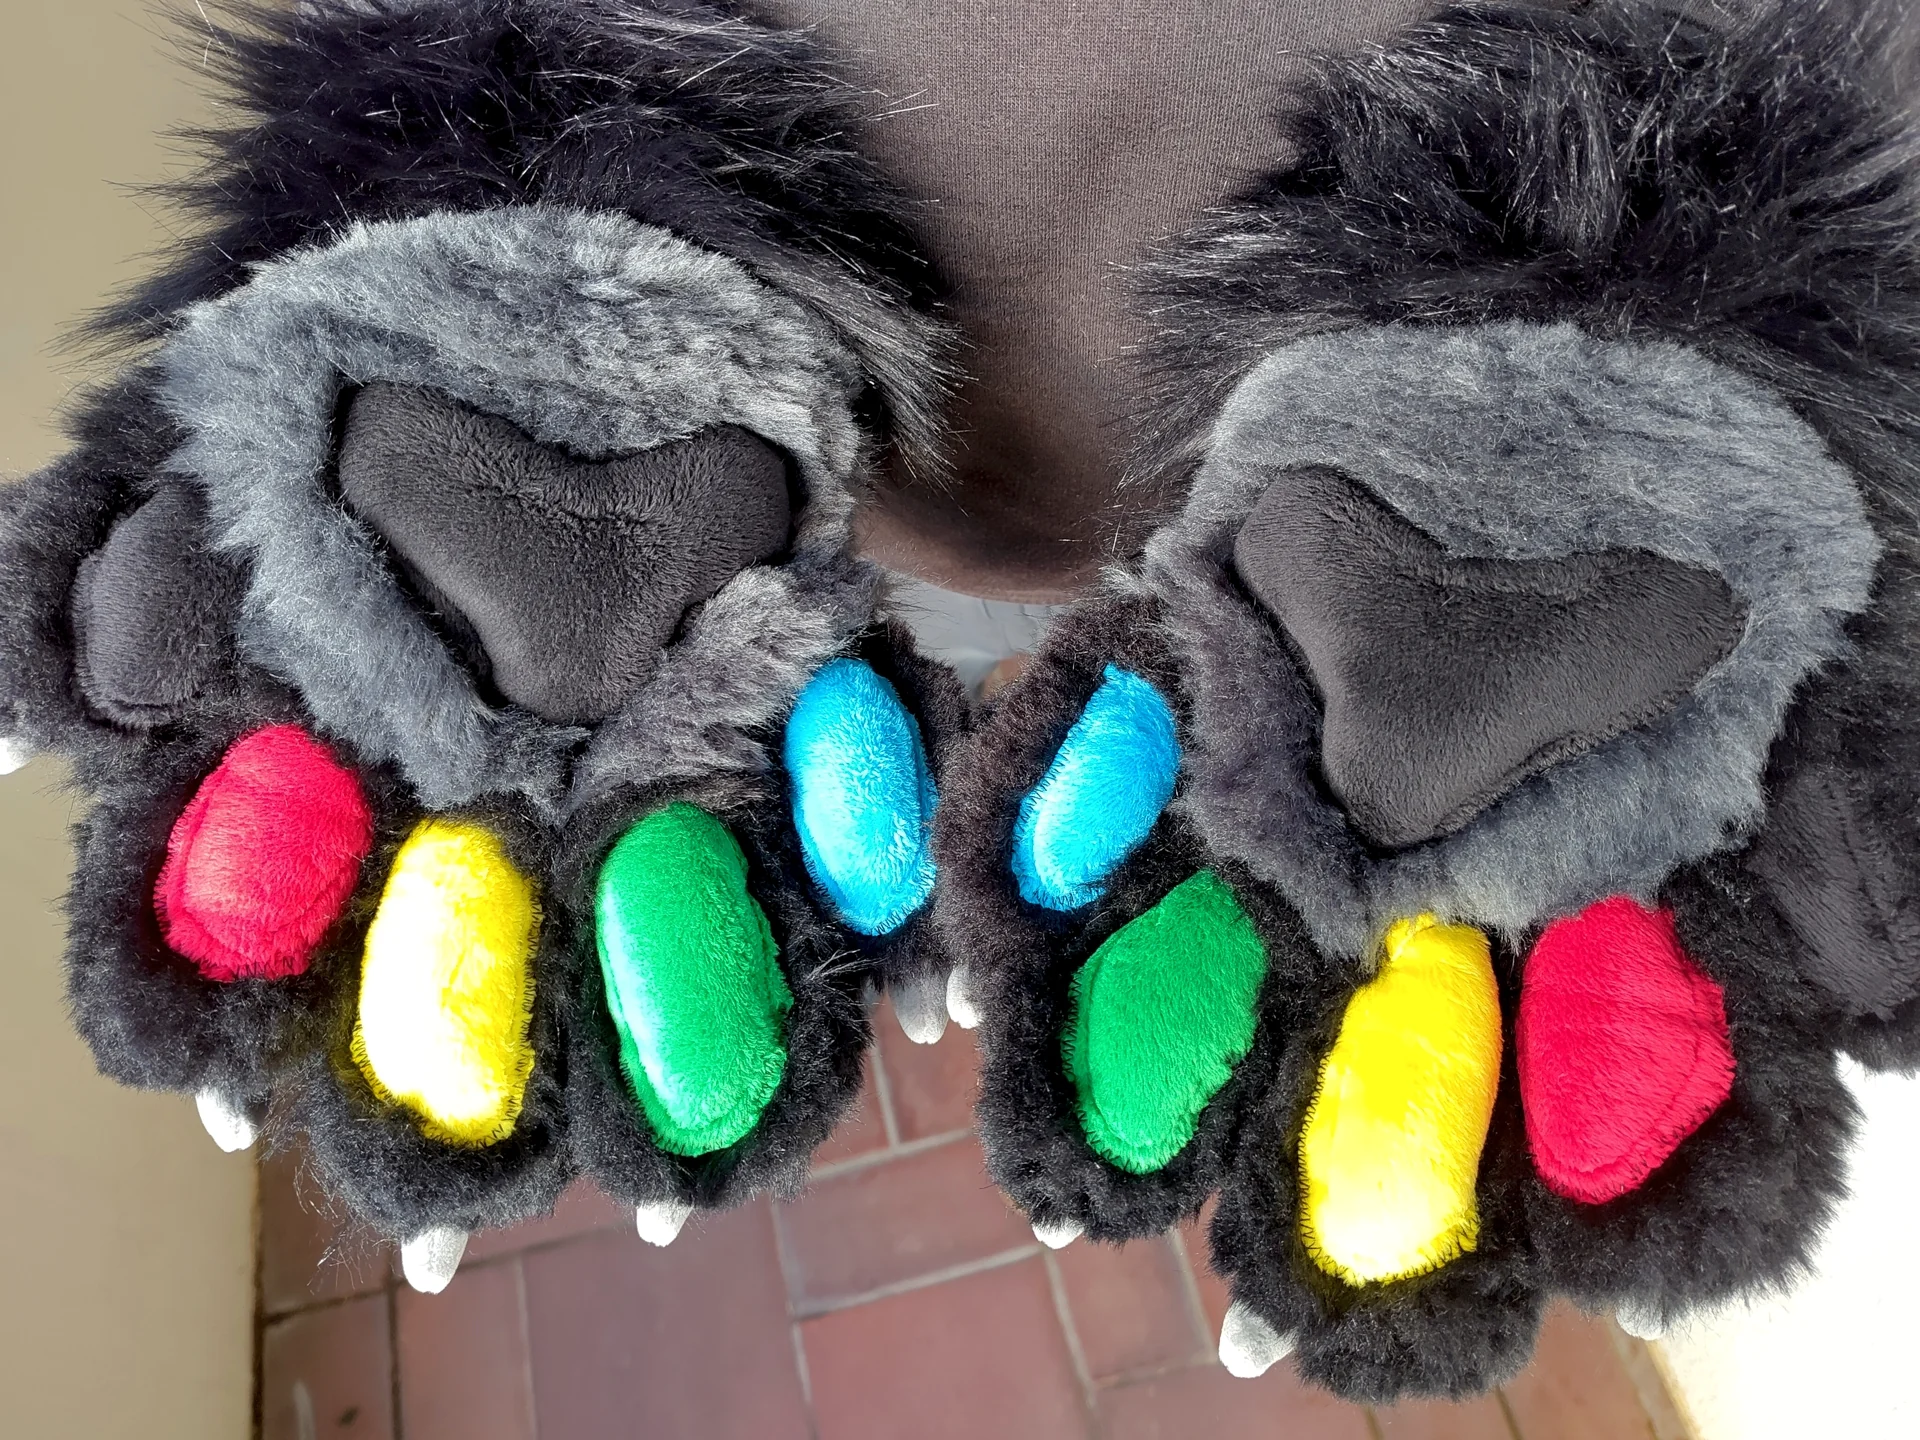 Puffy paws with black faux fur and red, green, blue, yellow and black paw pads.